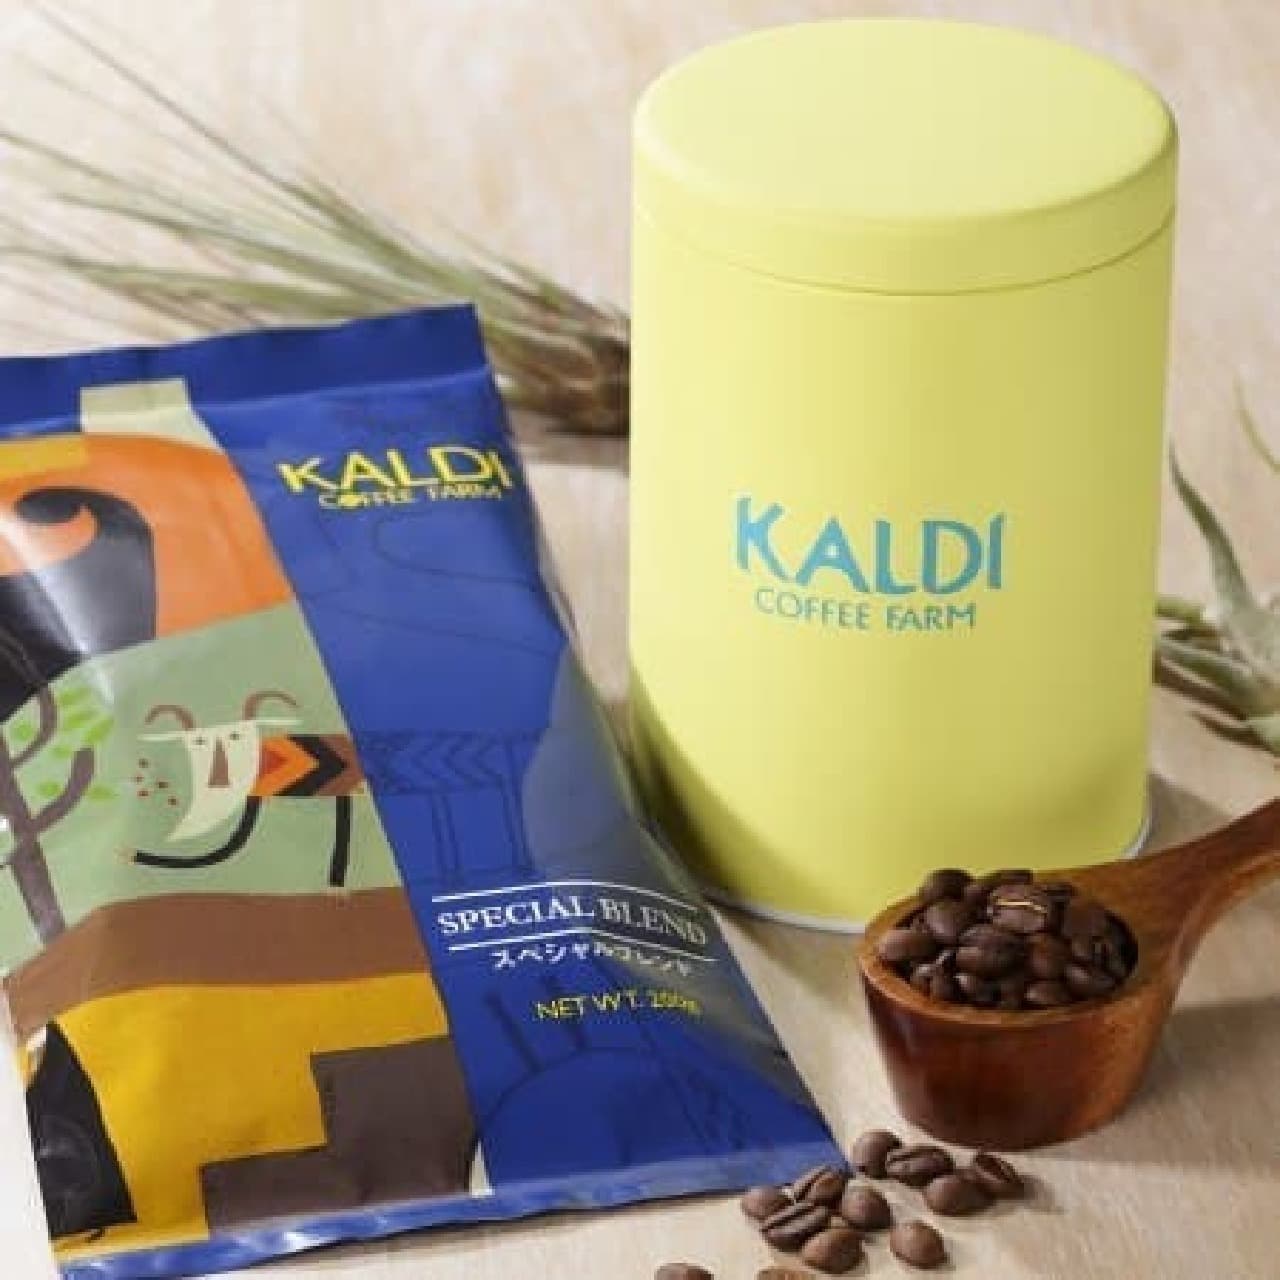 KALDI Coffee Farm "Special Blend & Canister Can Set"